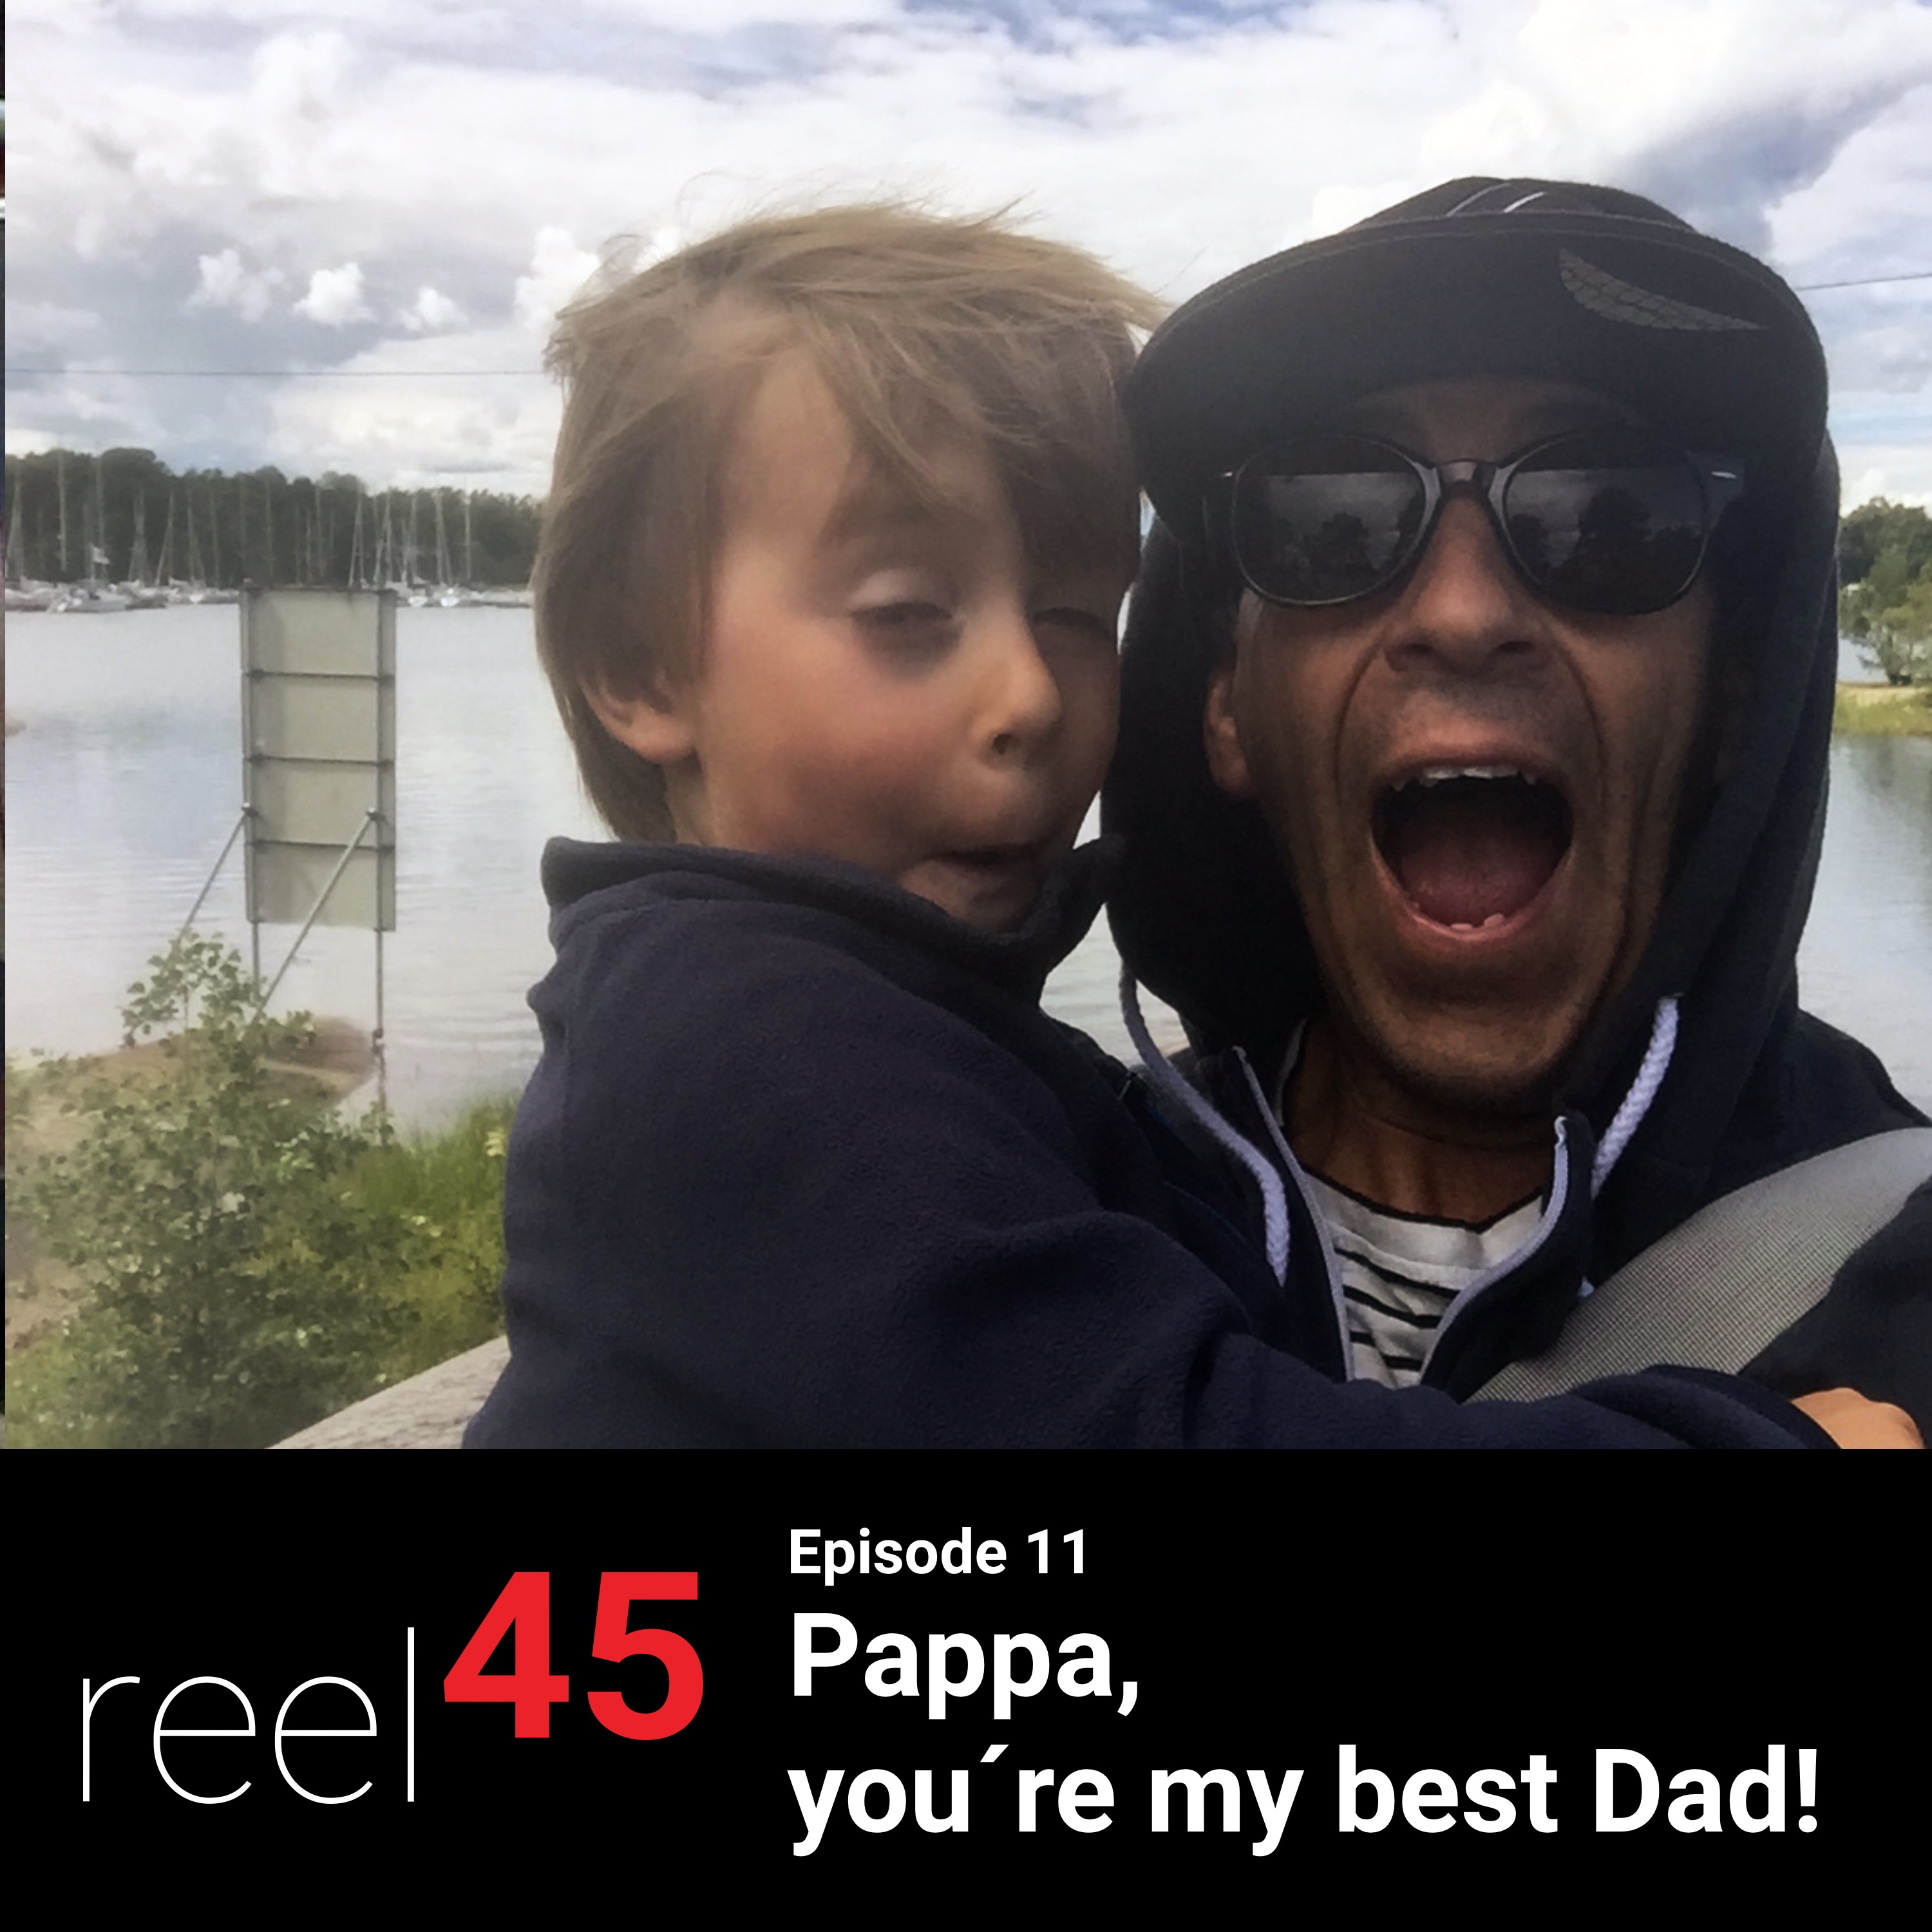 Episode 11 - Pappa, you're my best Dad!